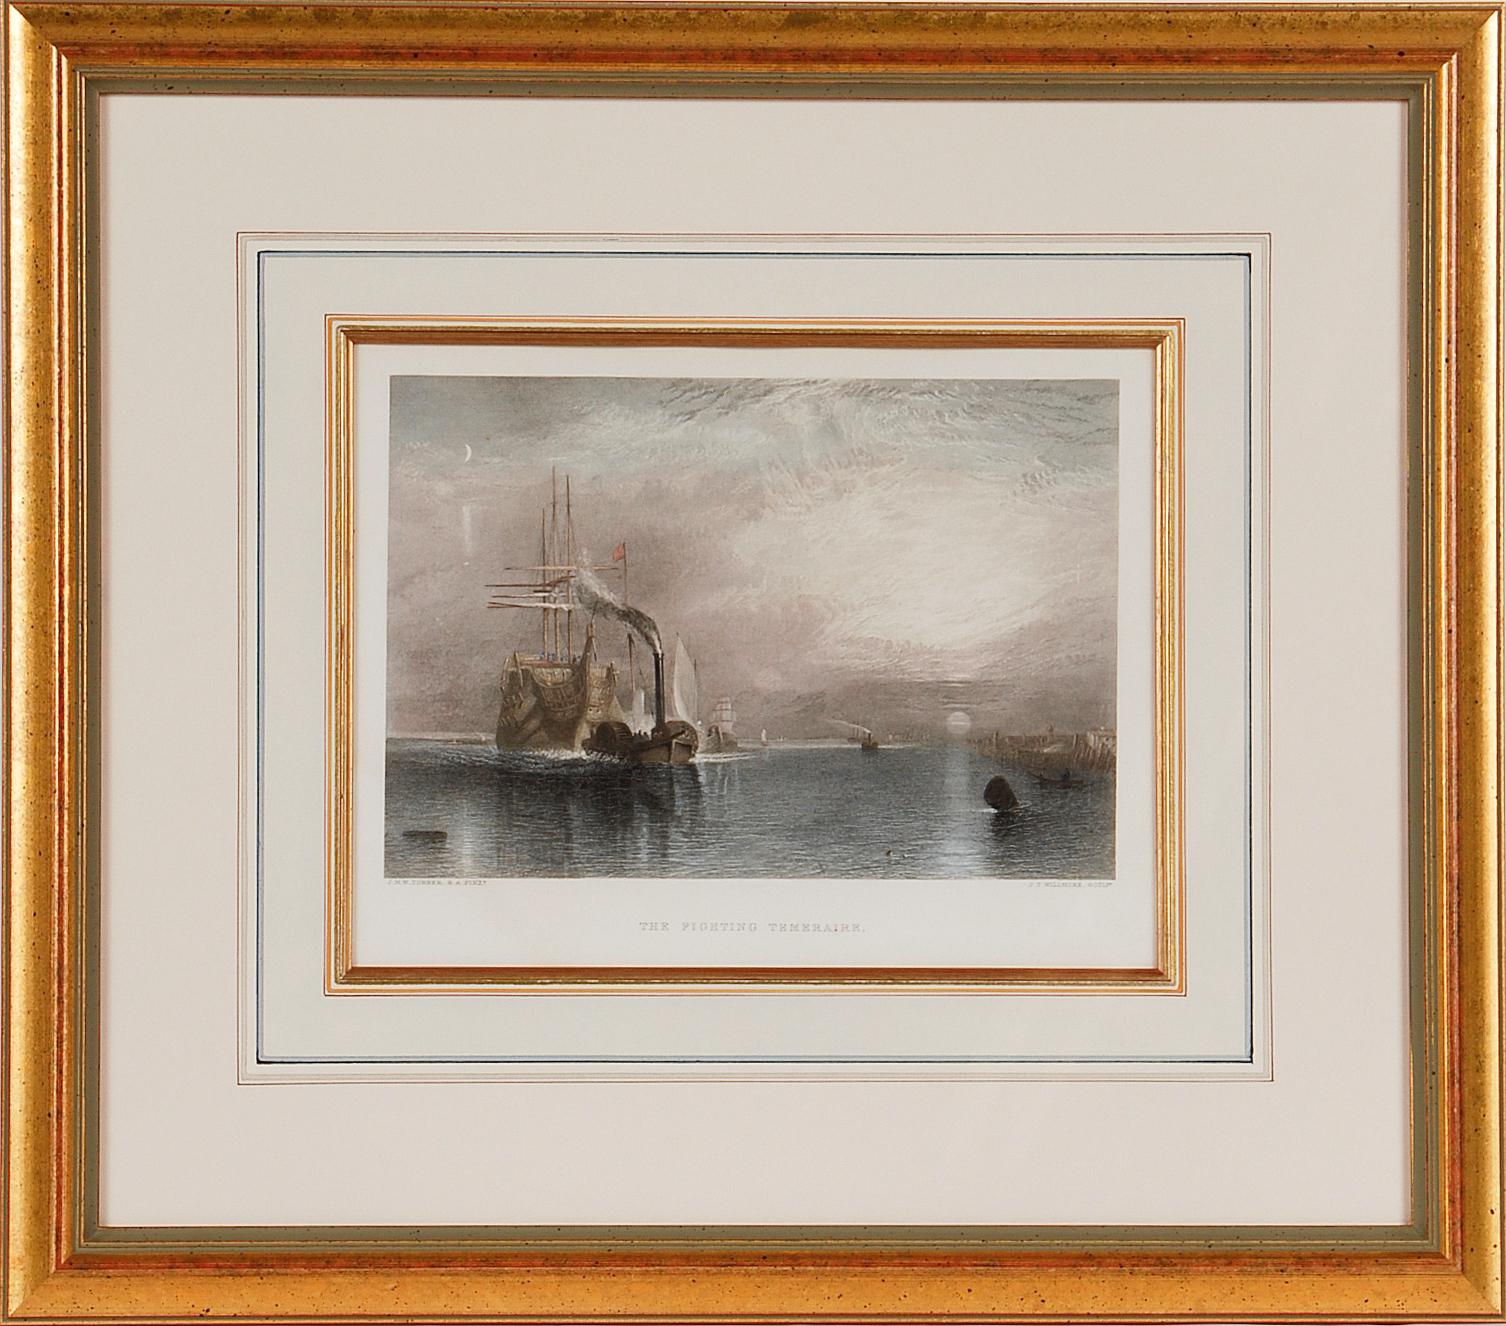 J.M.W. Turner Landscape Print - The Fighting Temeraire: A Framed 19th C. Engraving After J. M. W. Turner